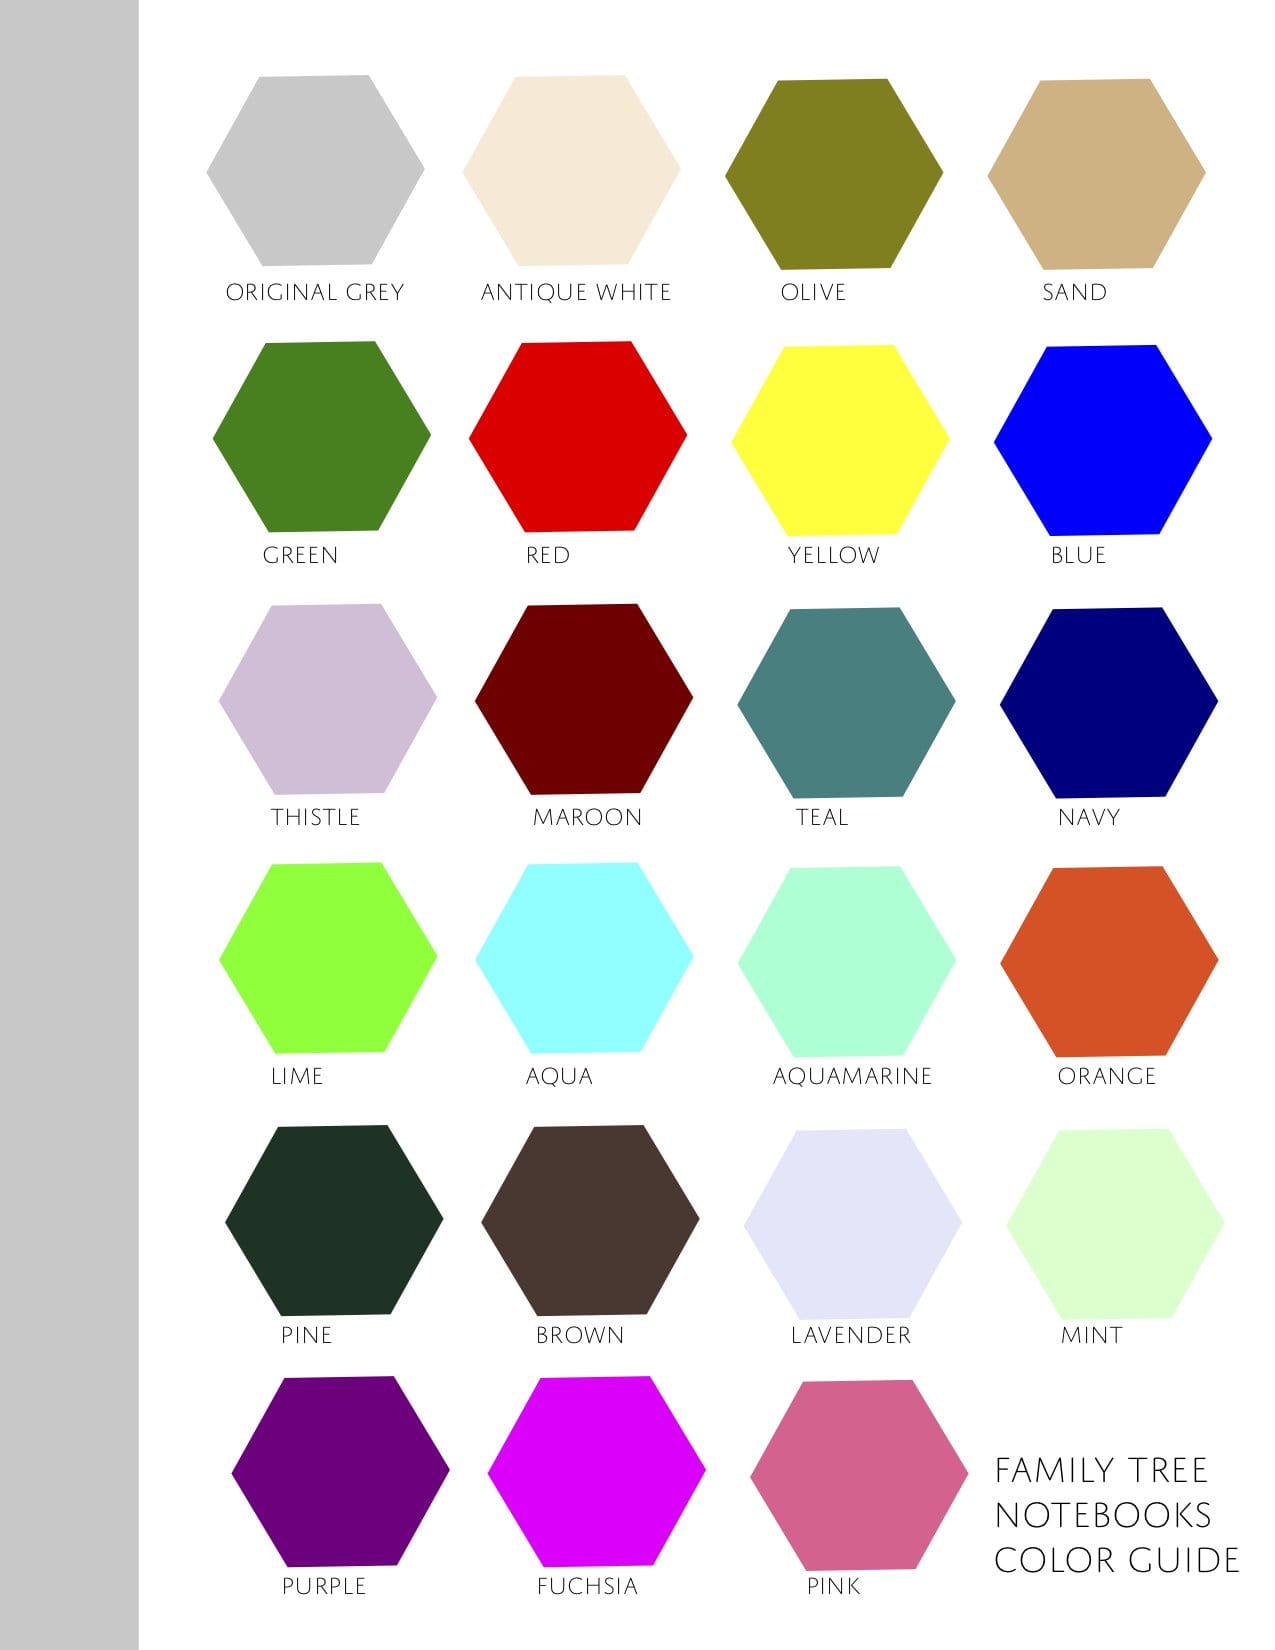 Family Tree Notebooks Color Guide (PDF)